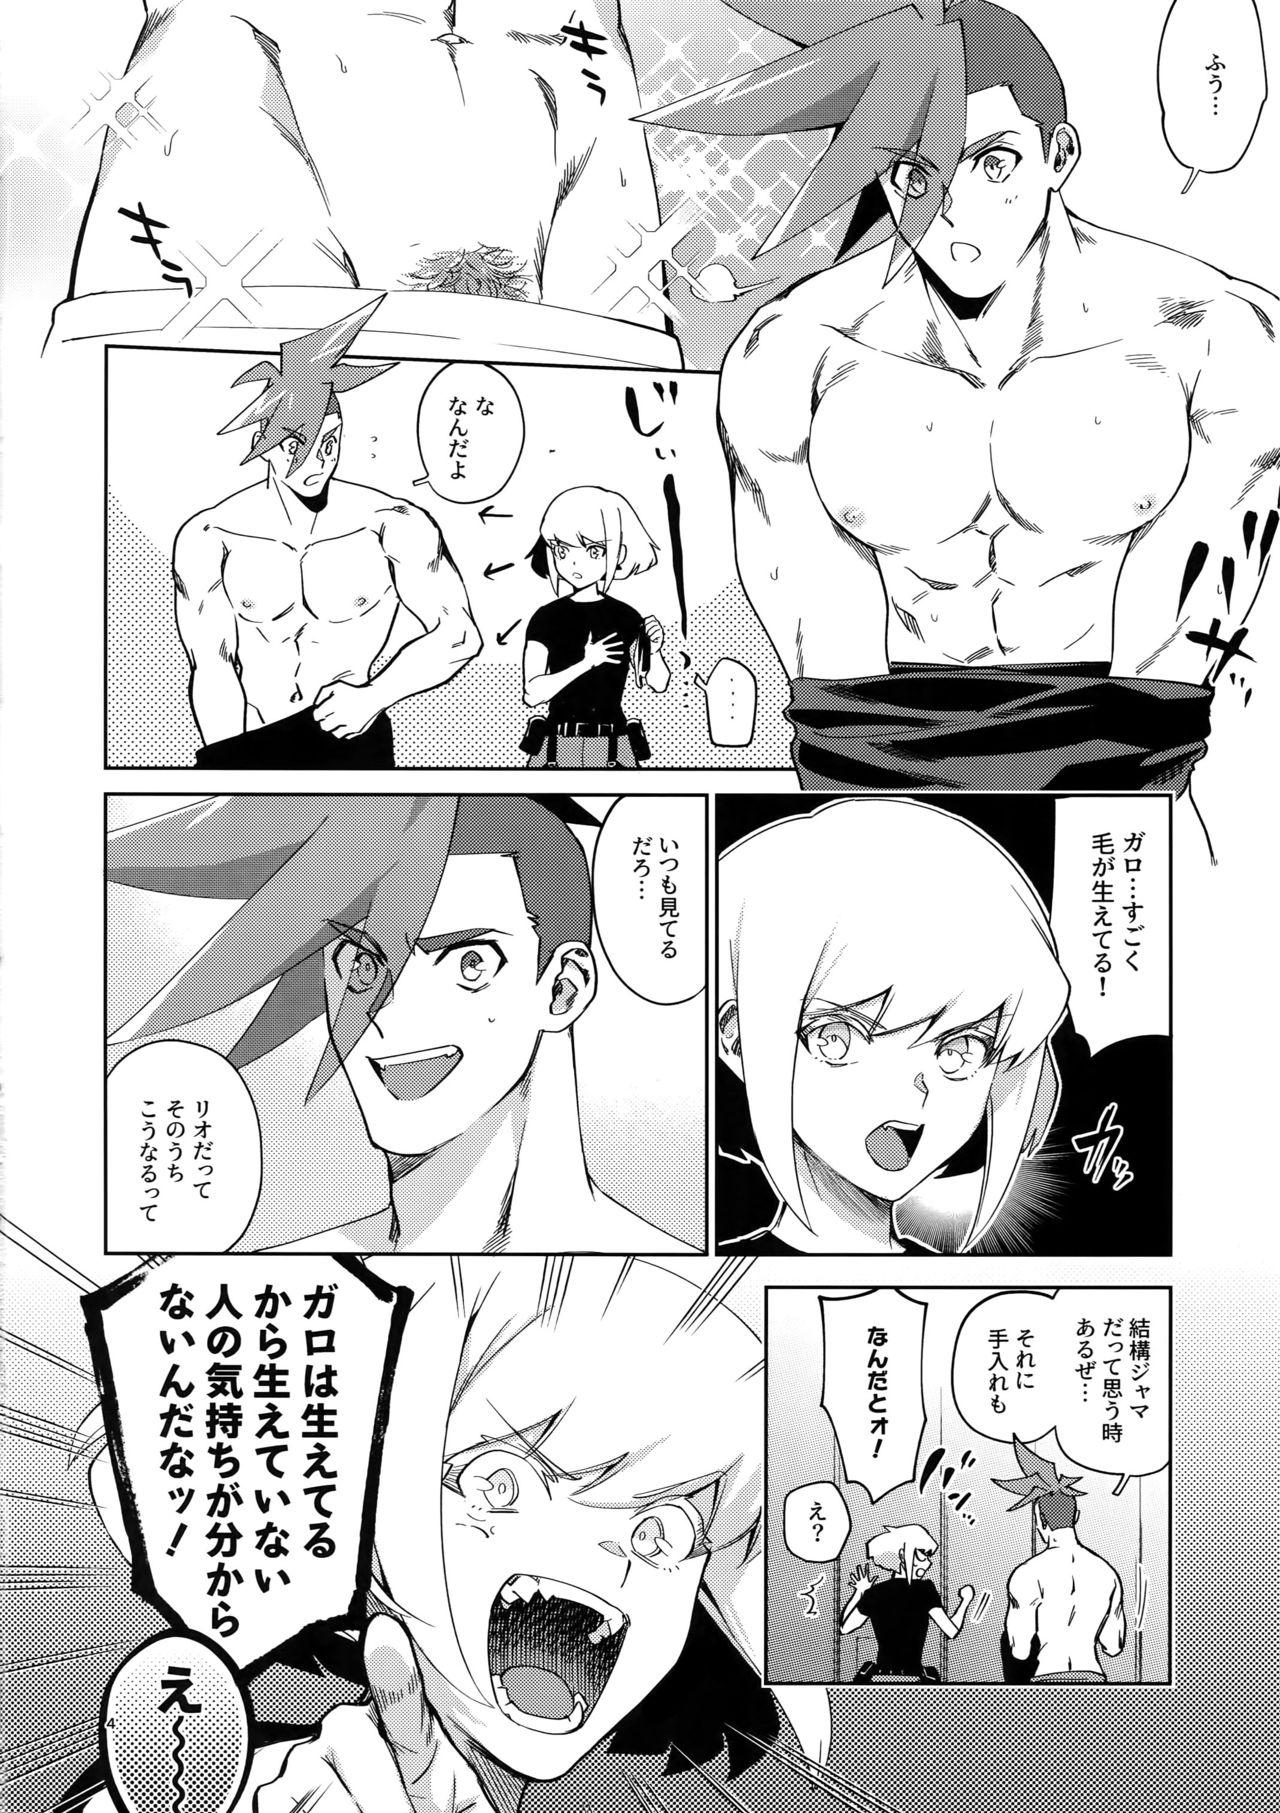 Jockstrap One and Only - Promare Negro - Page 3